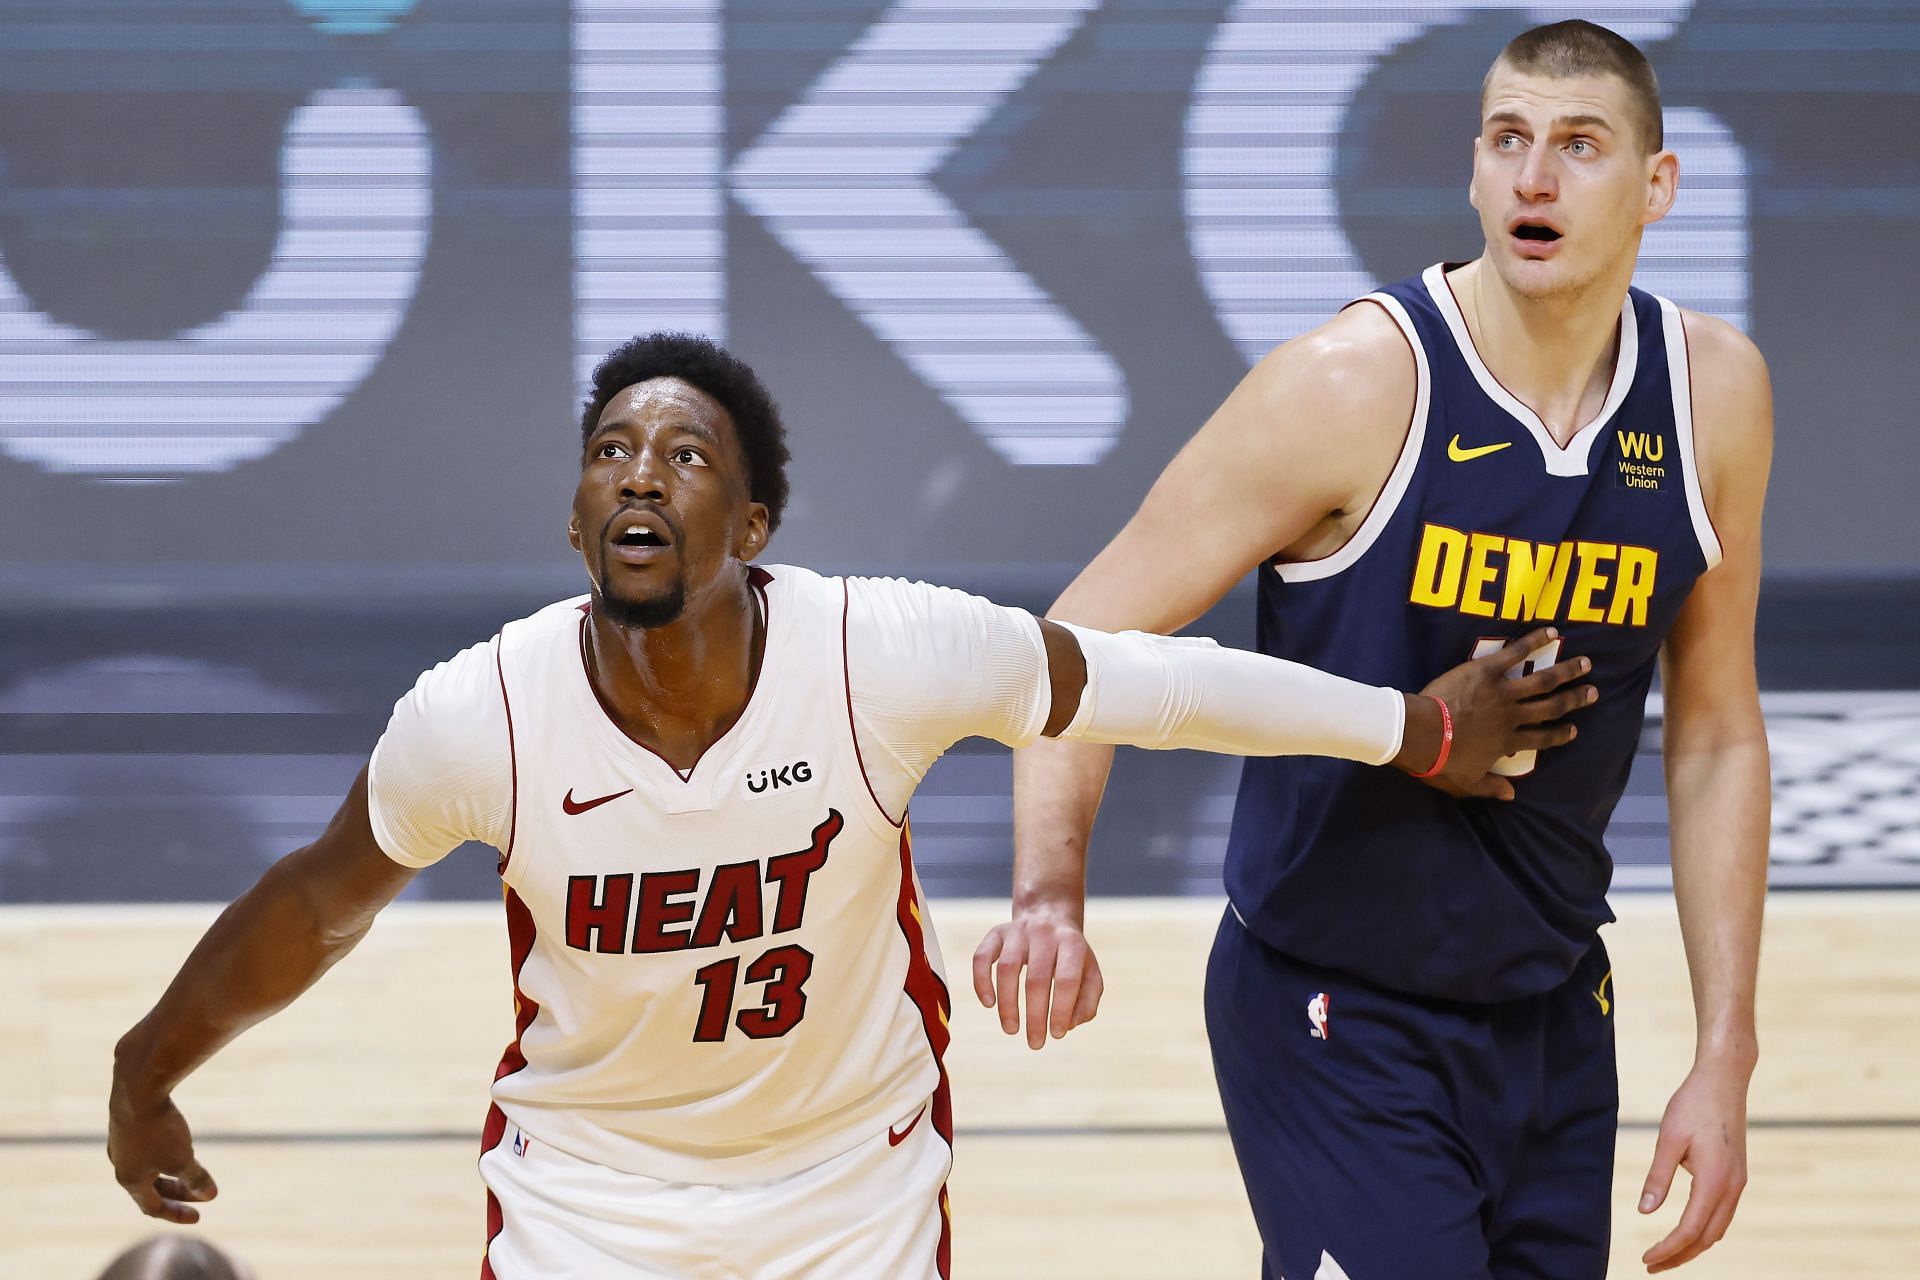 The Heat are 34-38 against the Nuggets all-time (Image via Getty Images)